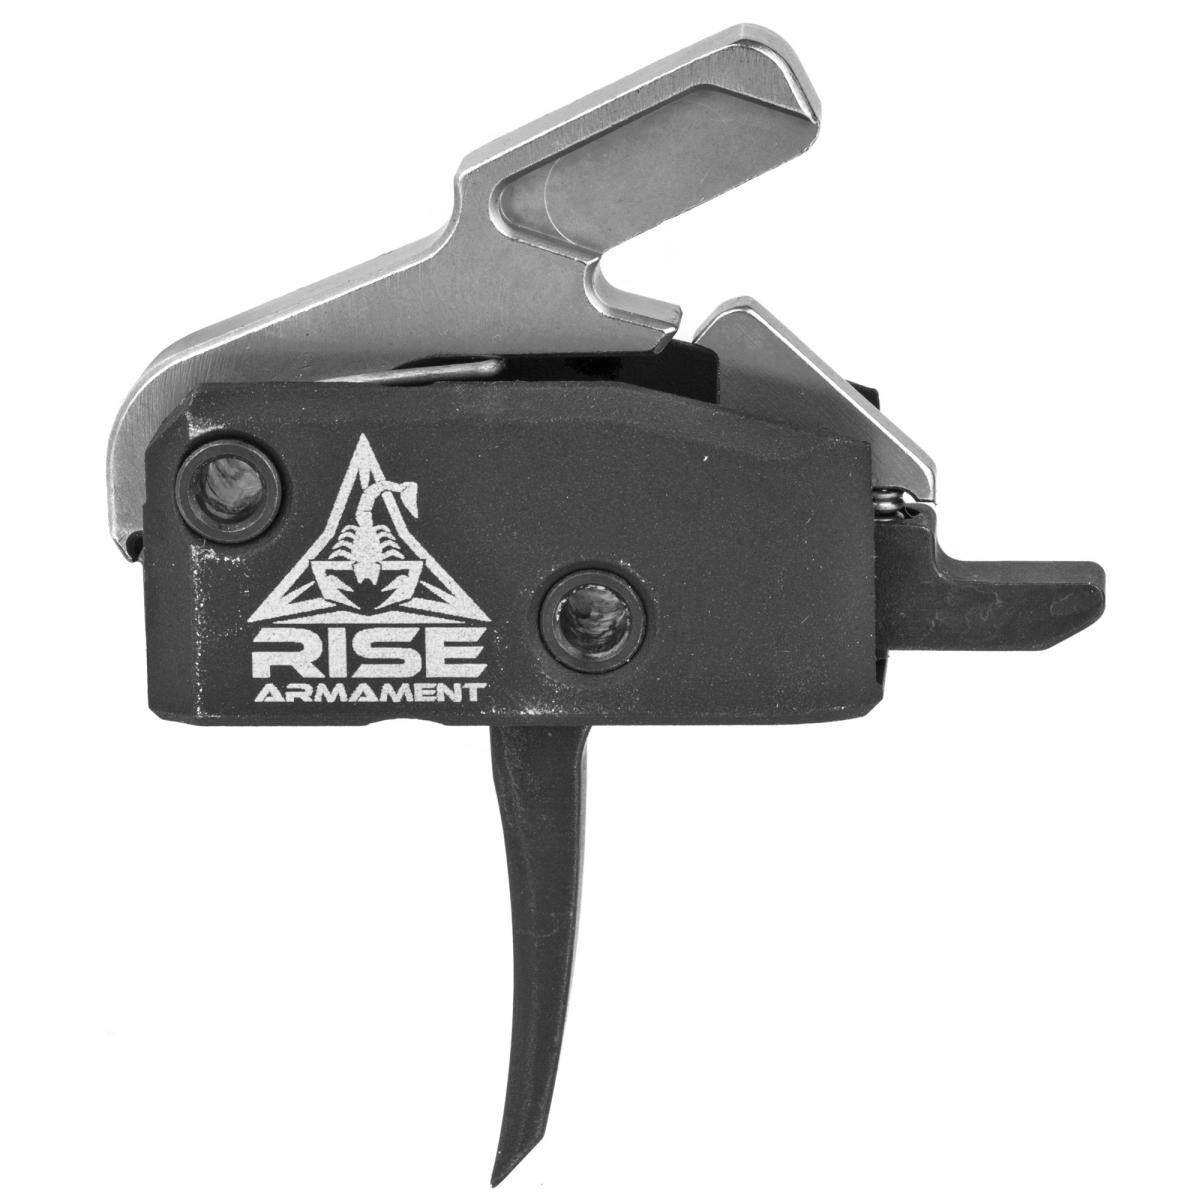 Rise High Performance Trigger Black - 4Shooters